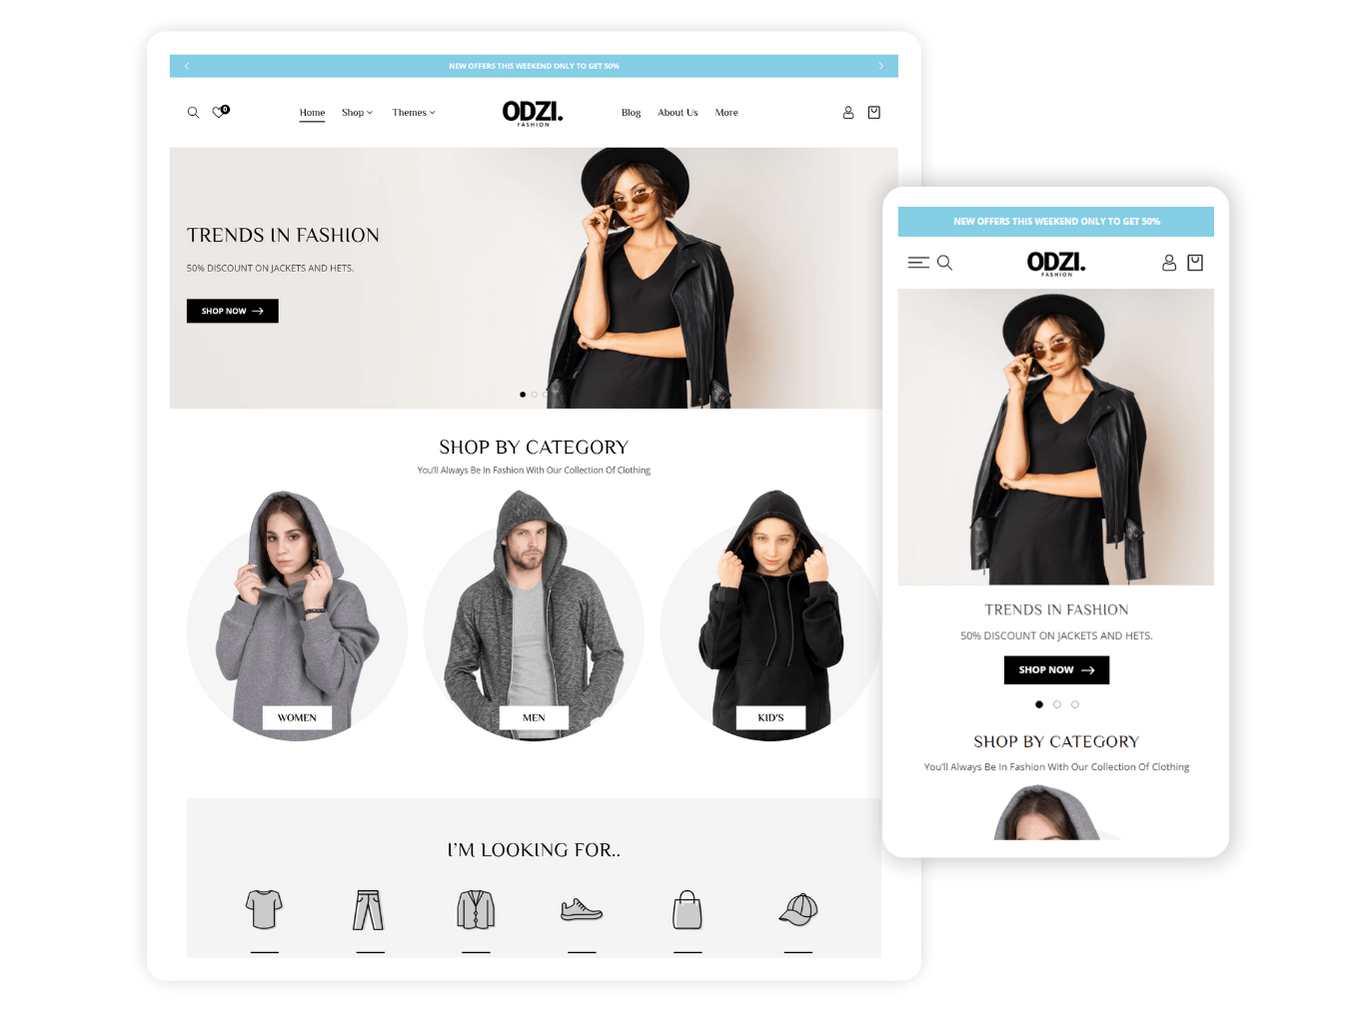 Best Shopify Themes For Clothing